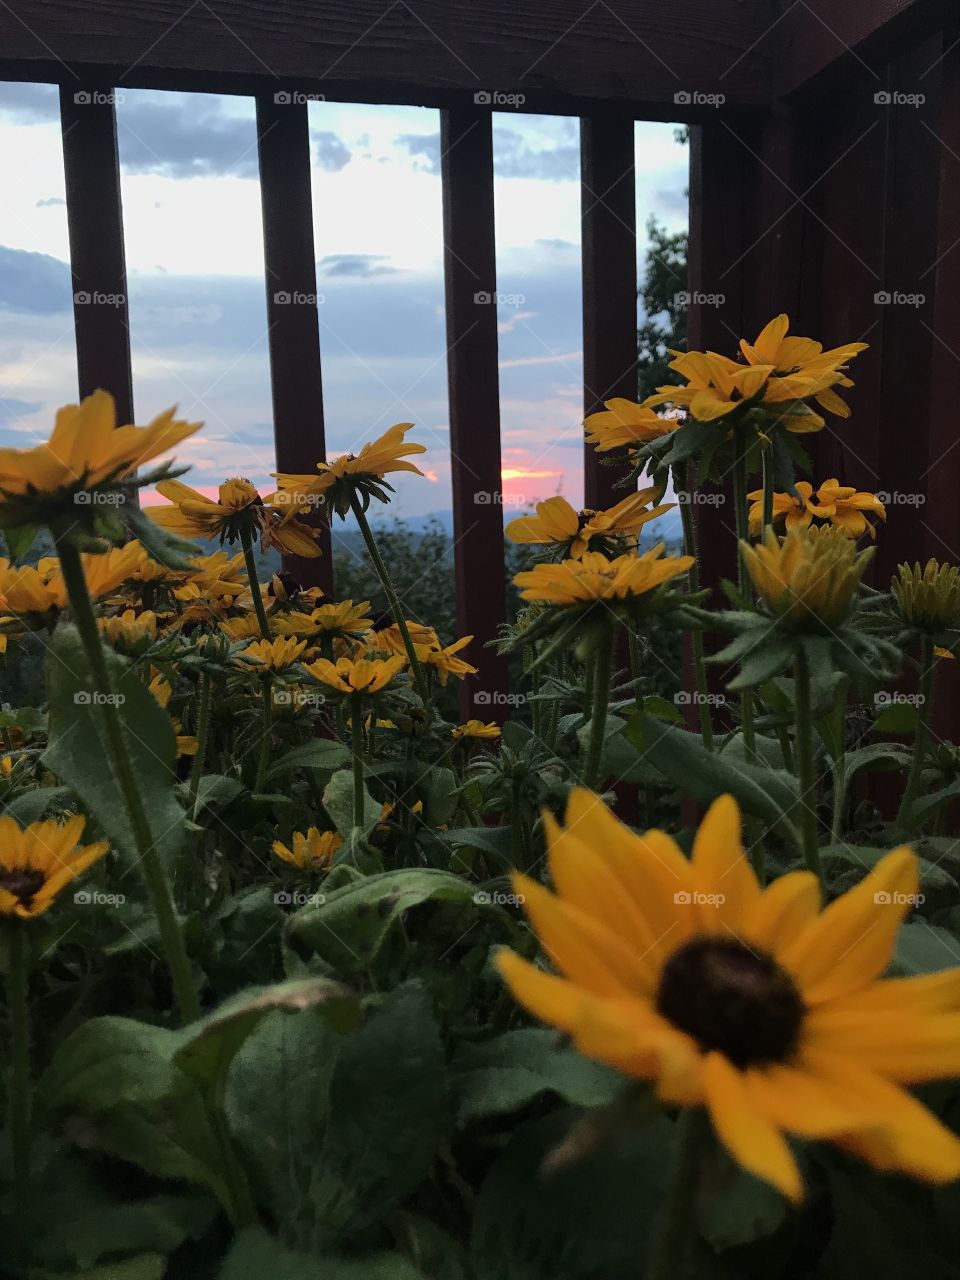 Sunsets and sunflowers 